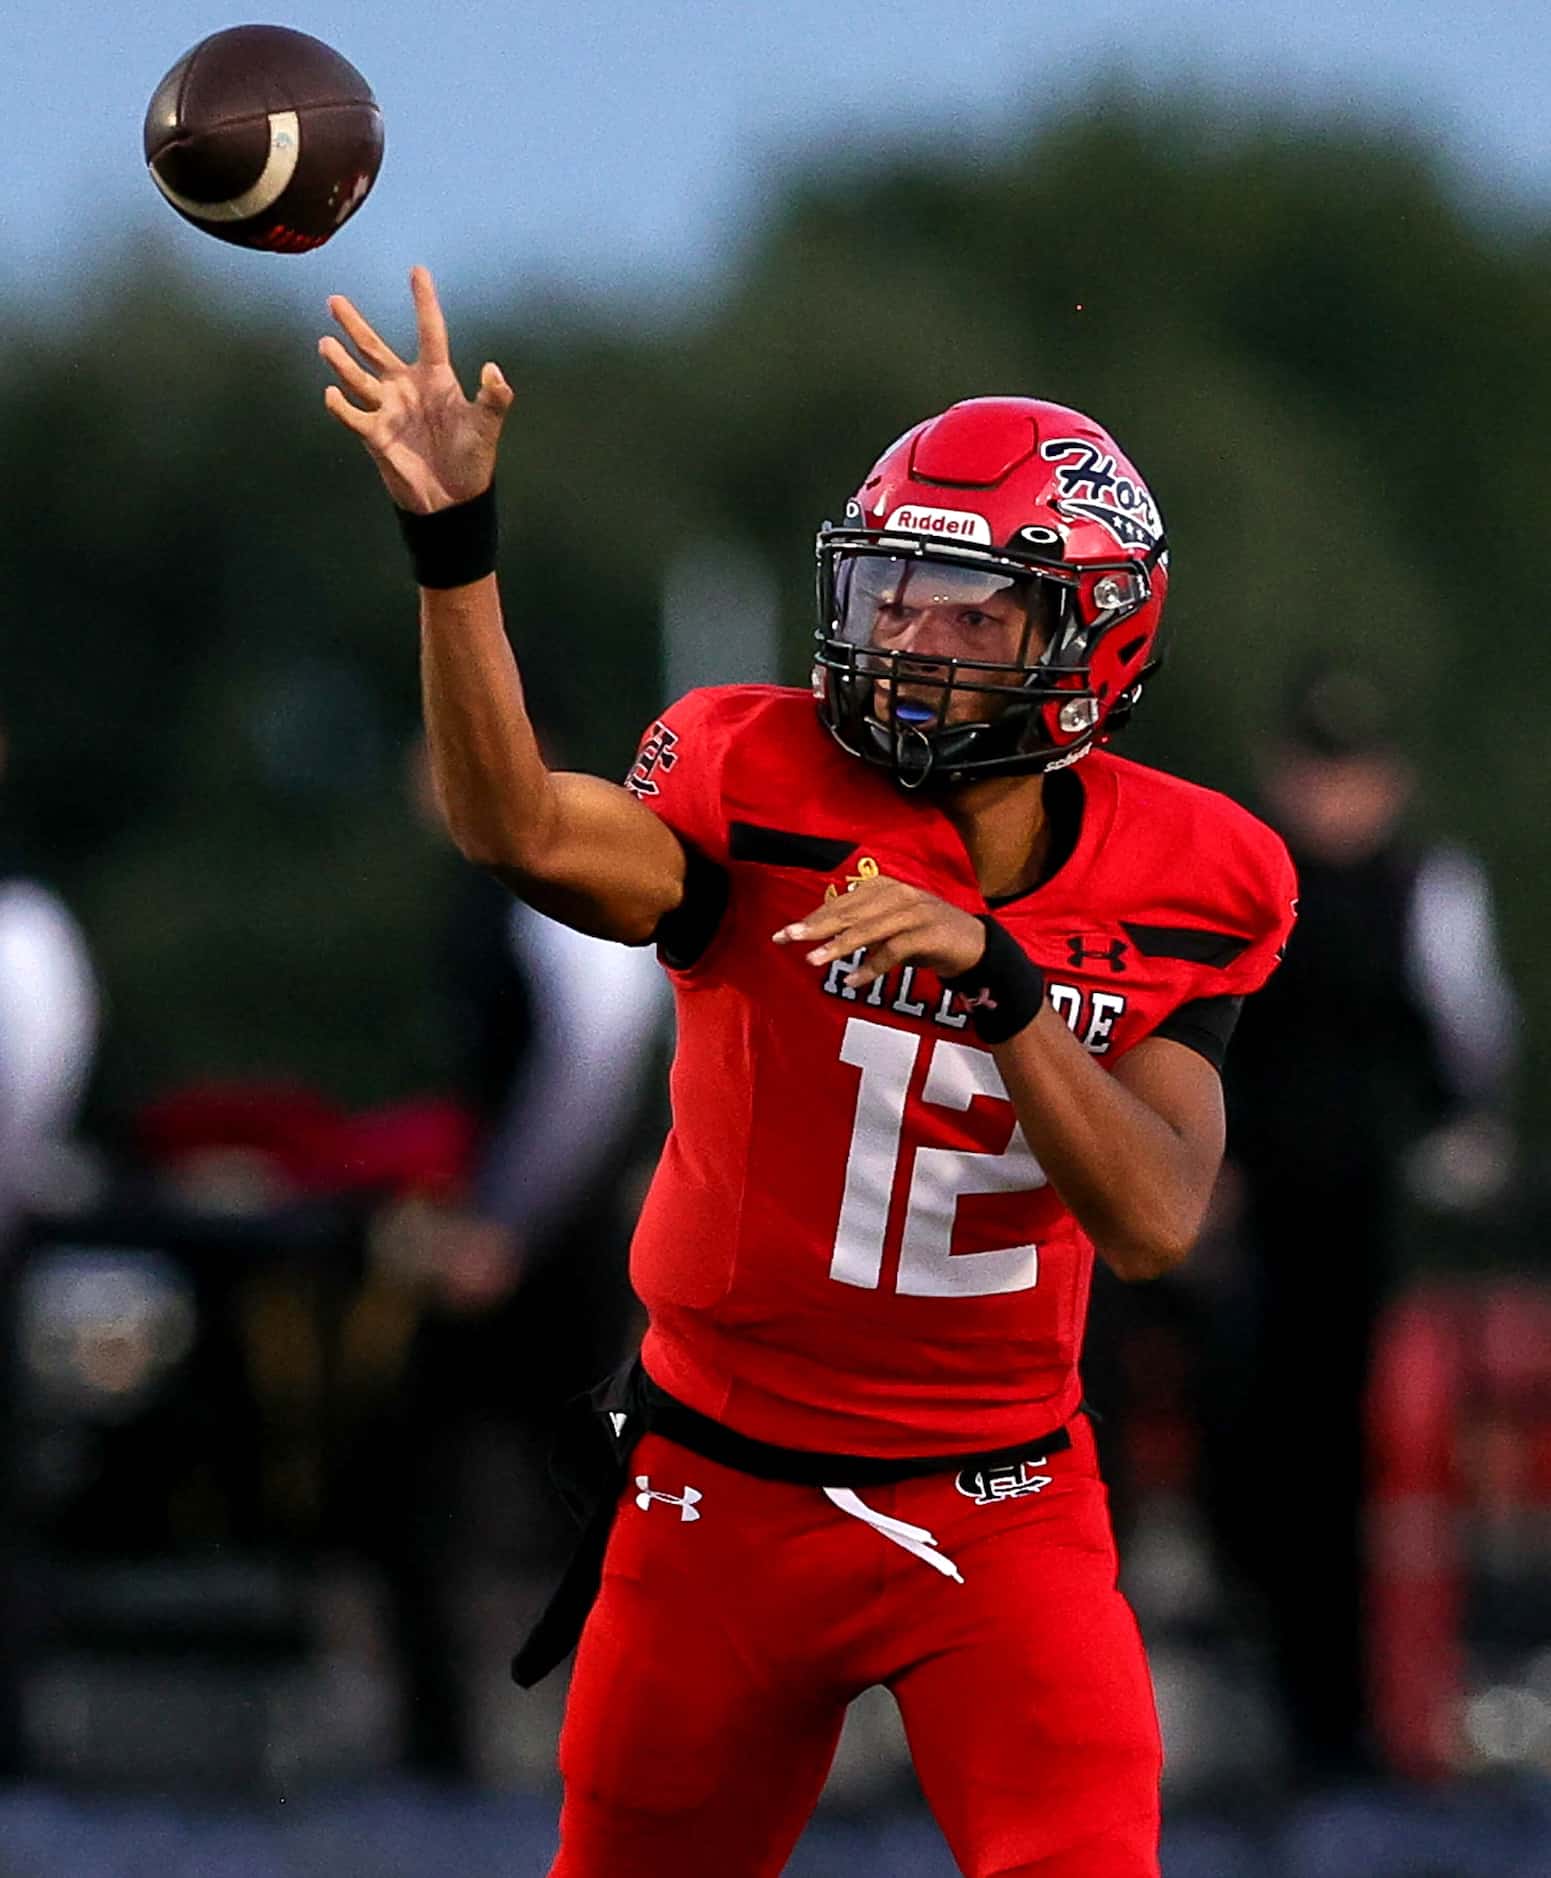 Cedar Hill quarterback Anthony Edwards attempts a pass against Mansfield during the first...